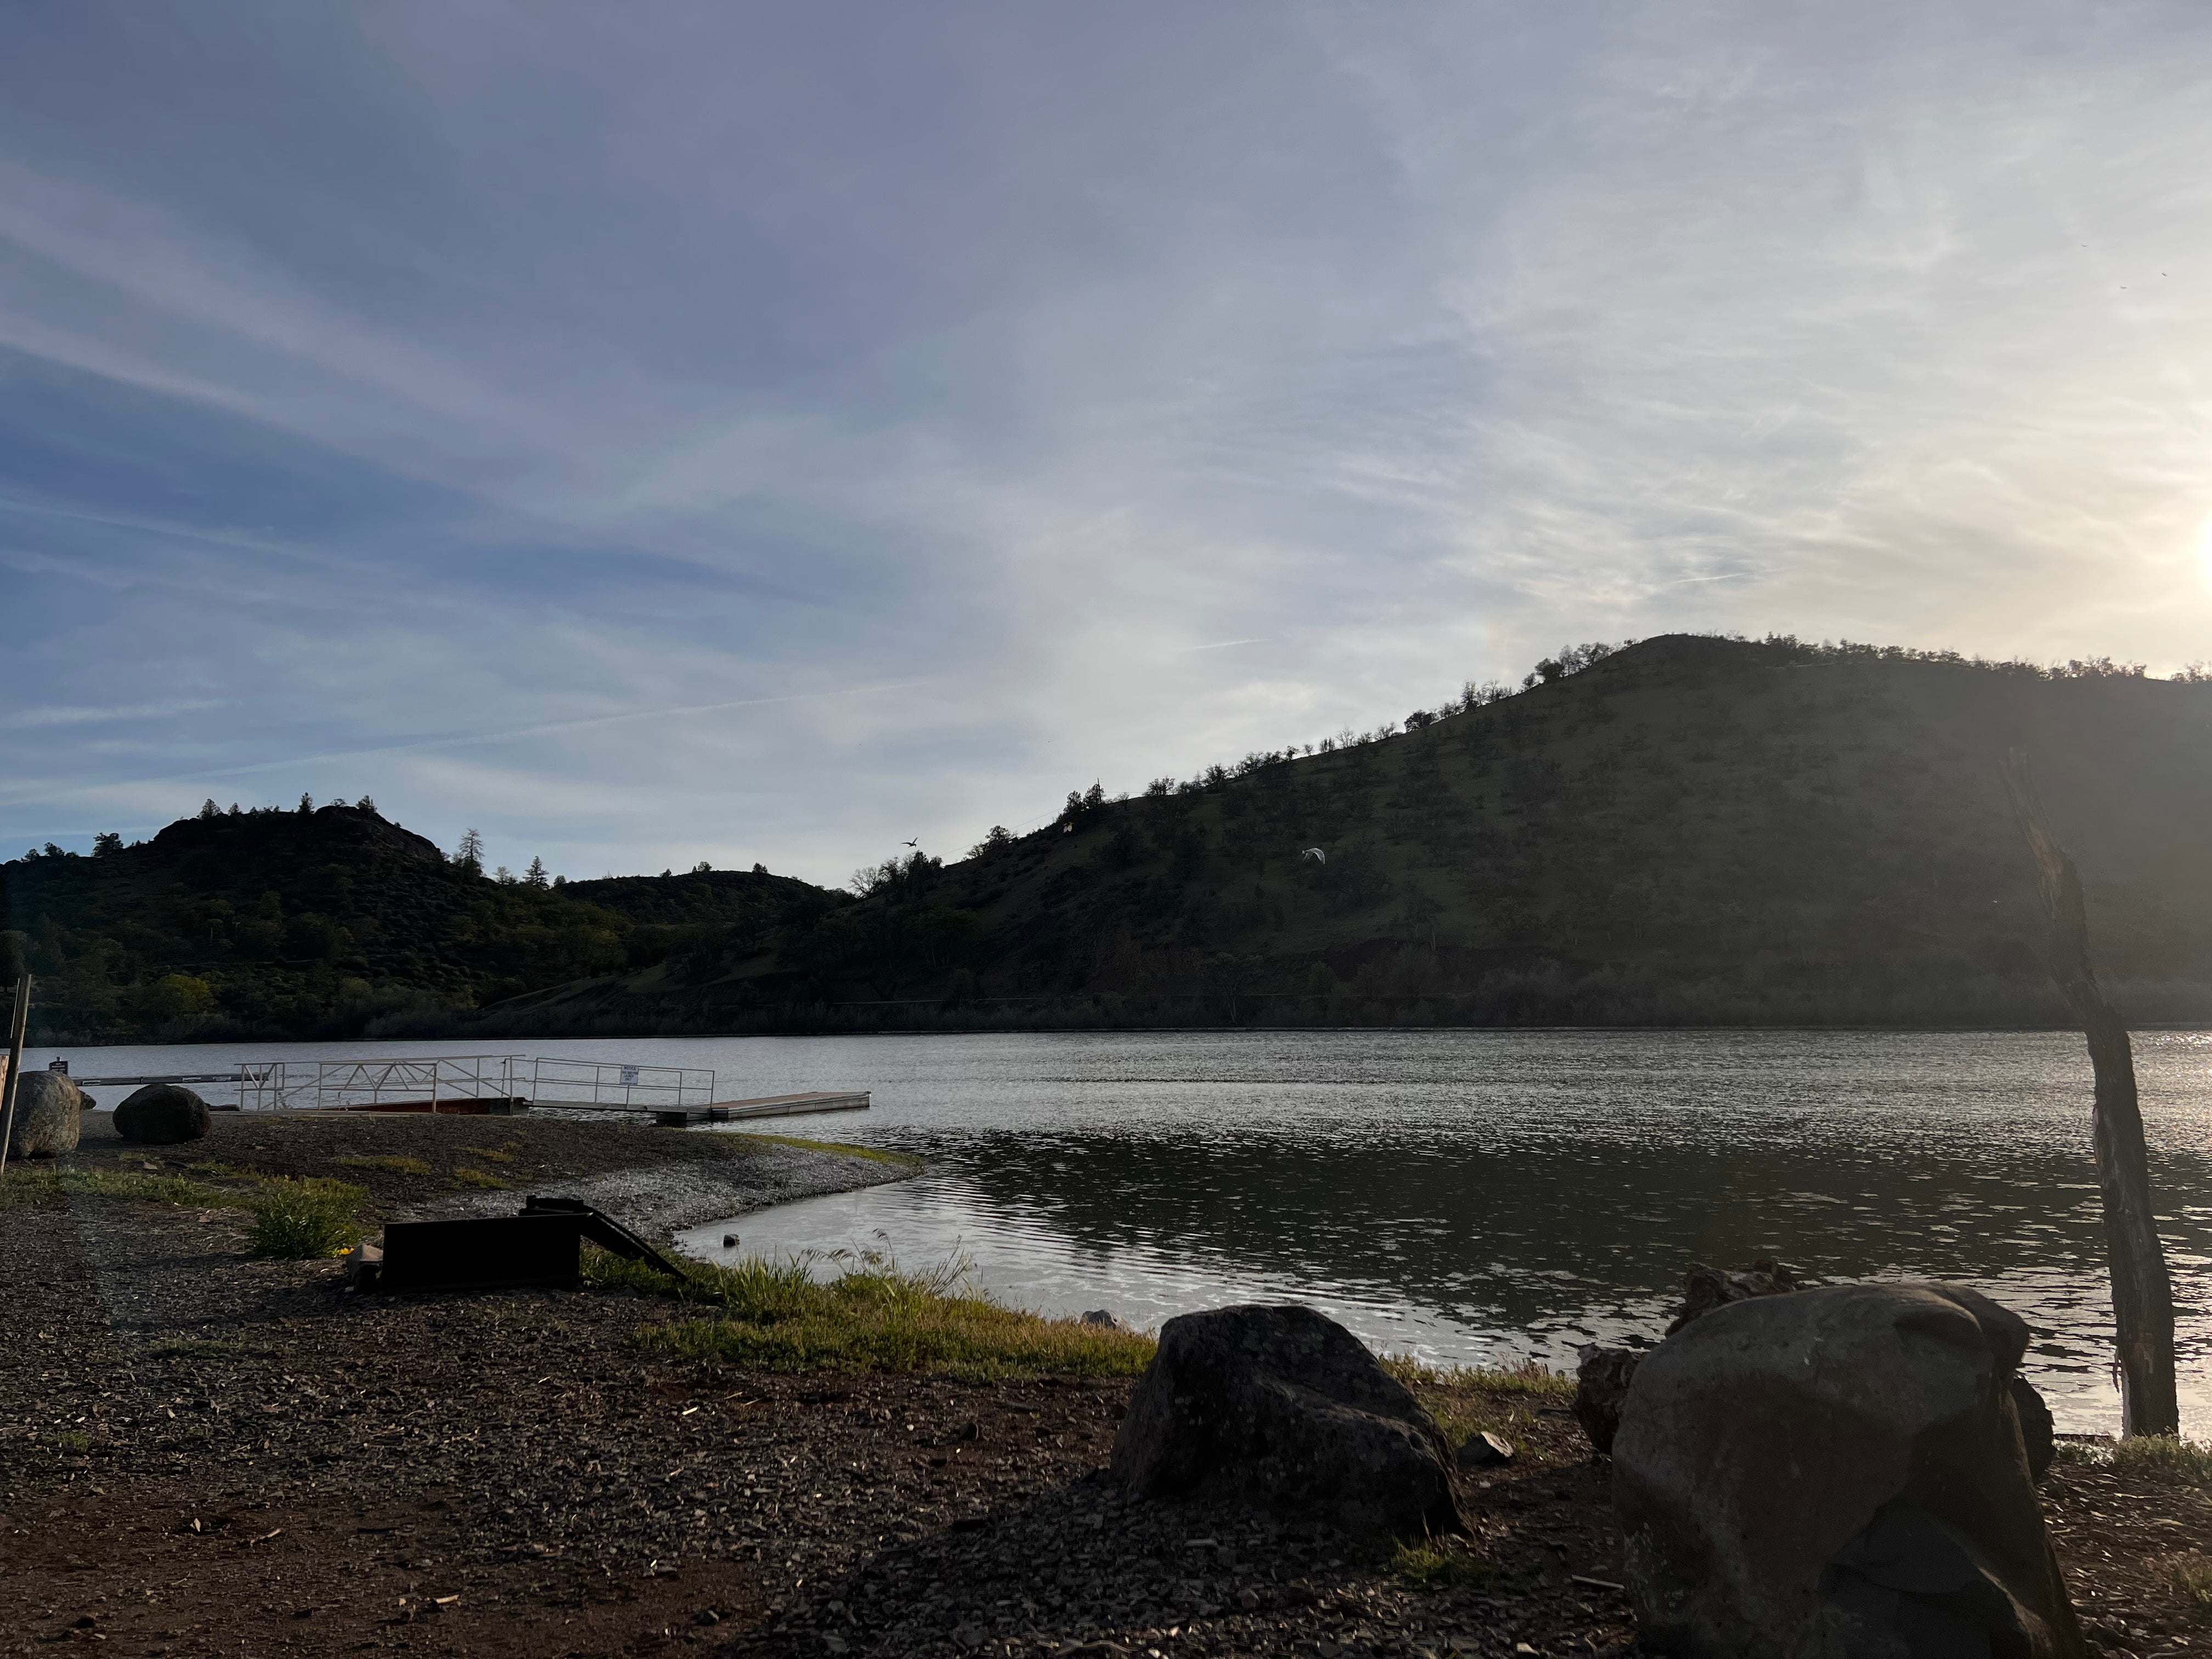 Camper submitted image from Iron Gate Reservoir - 4